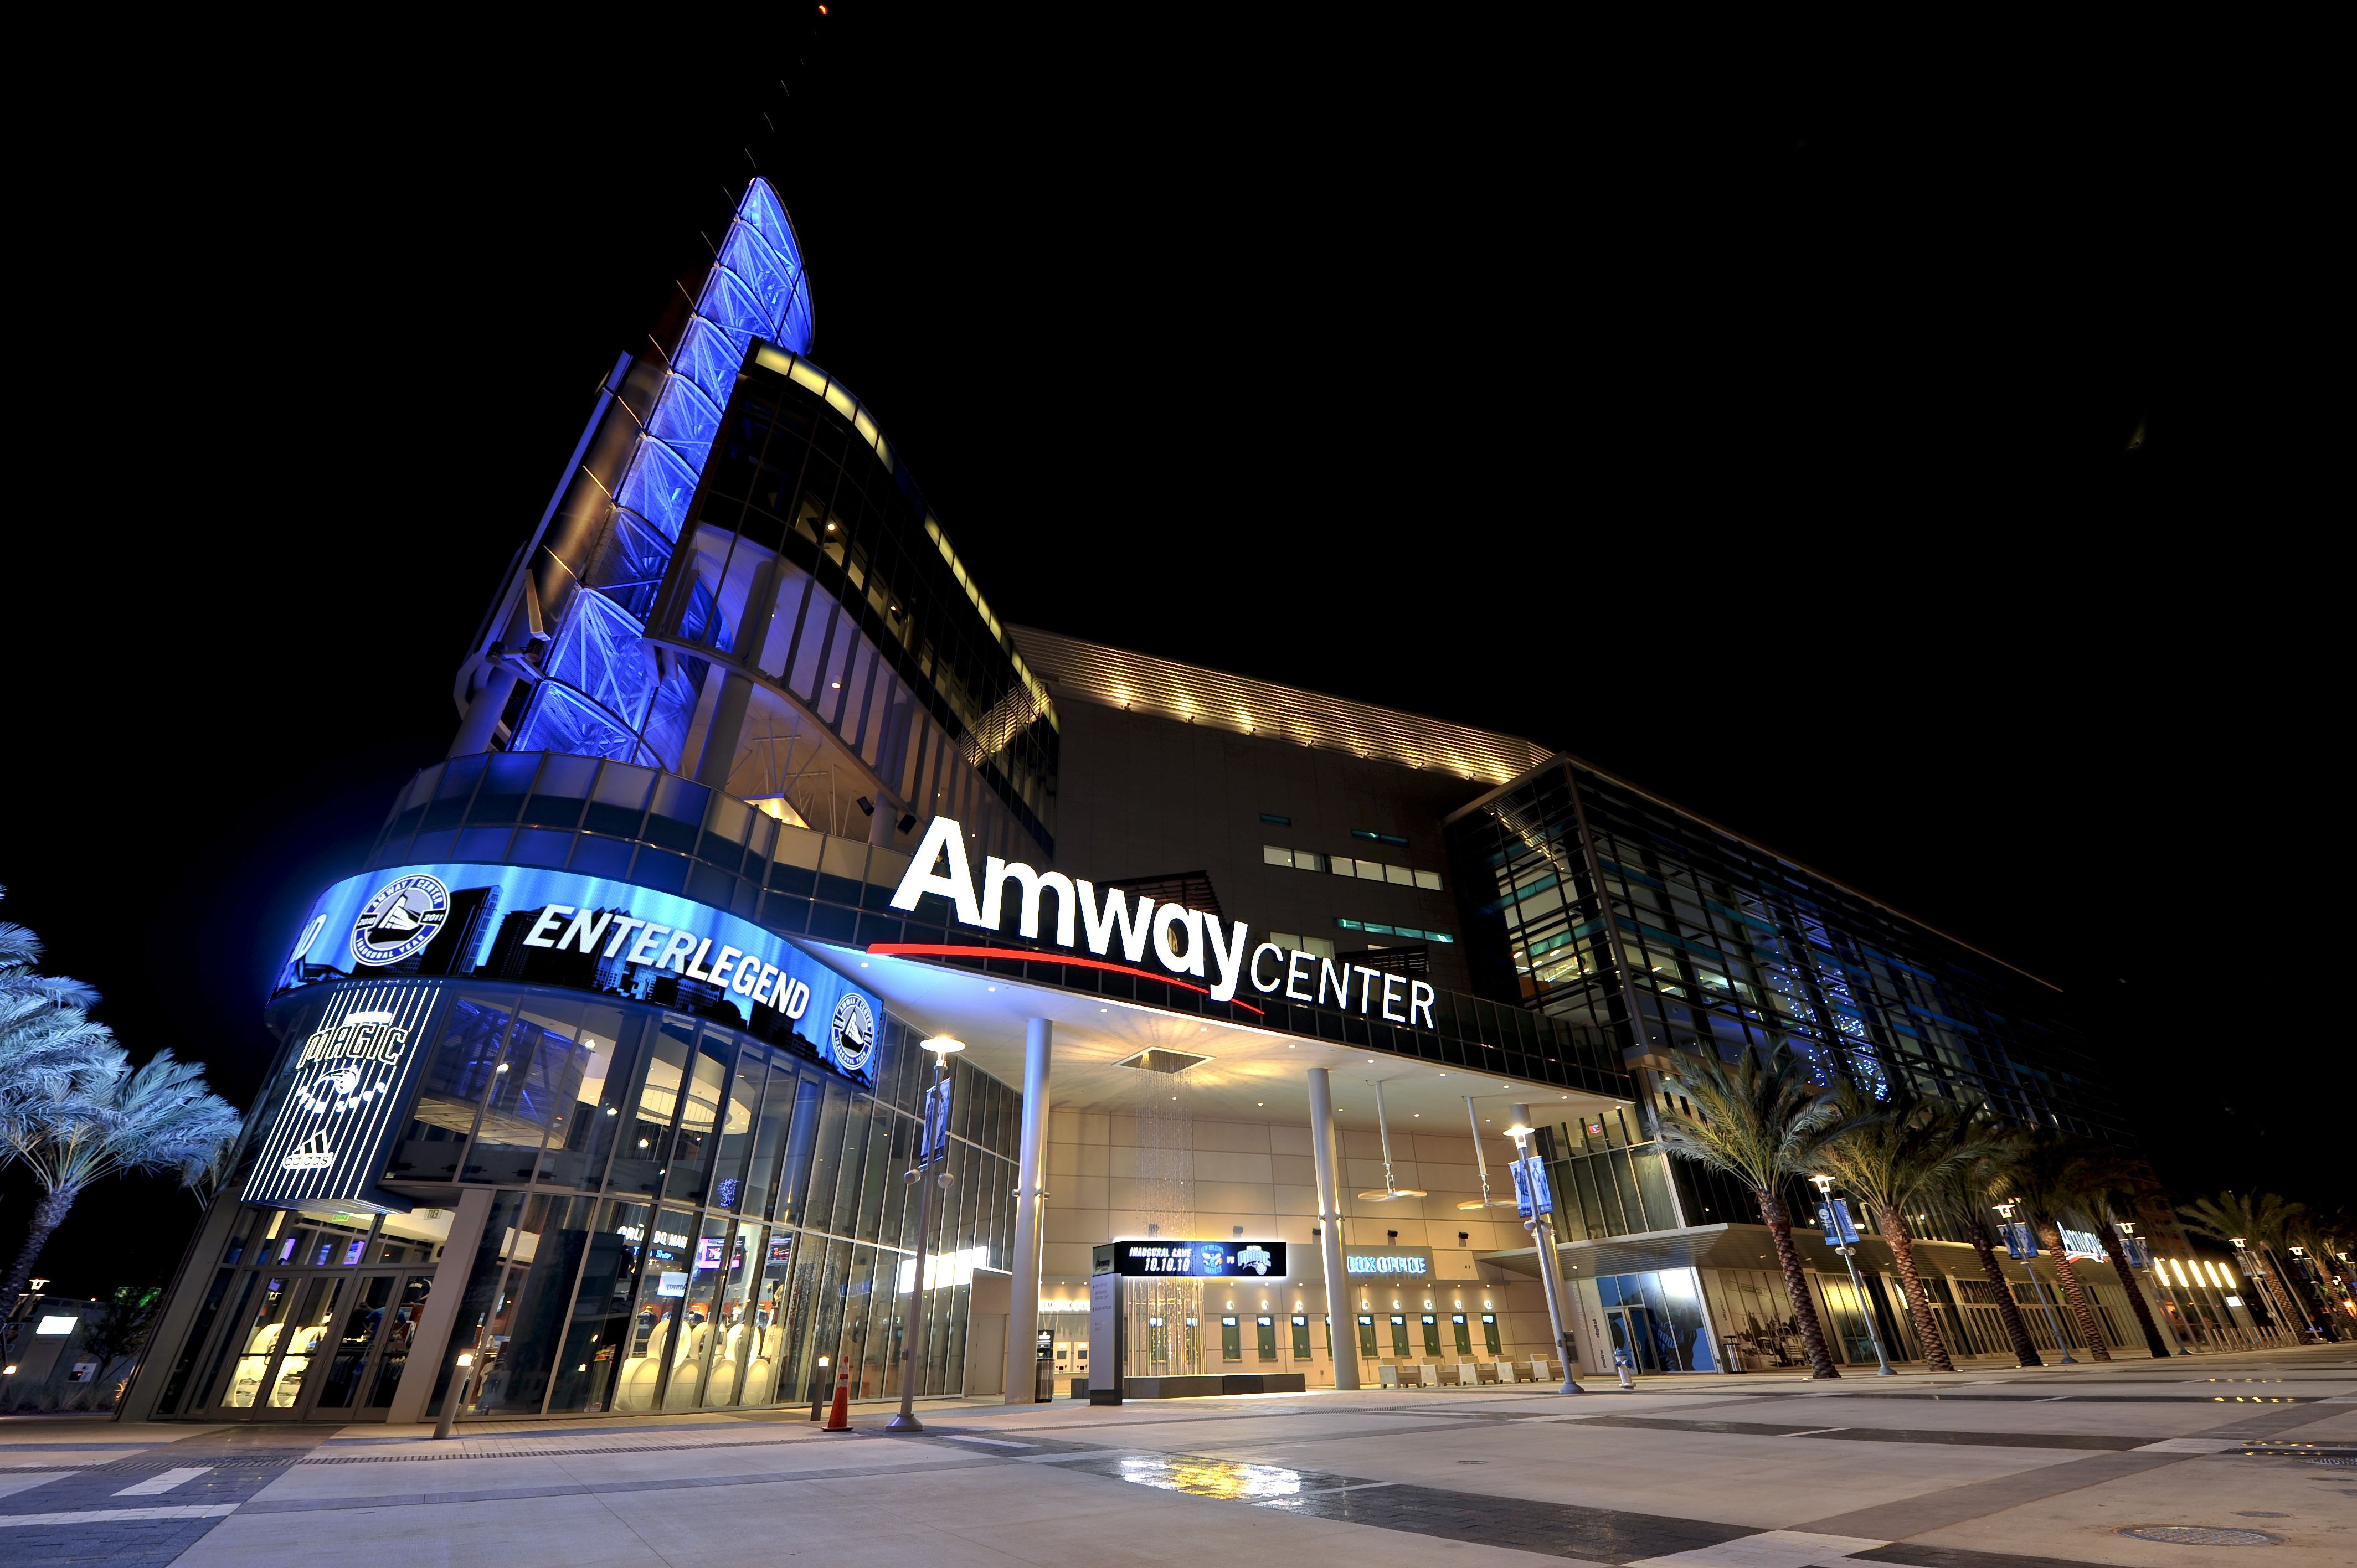 Amway Center - Home of the Orlando Magic | my business (www.amway ...